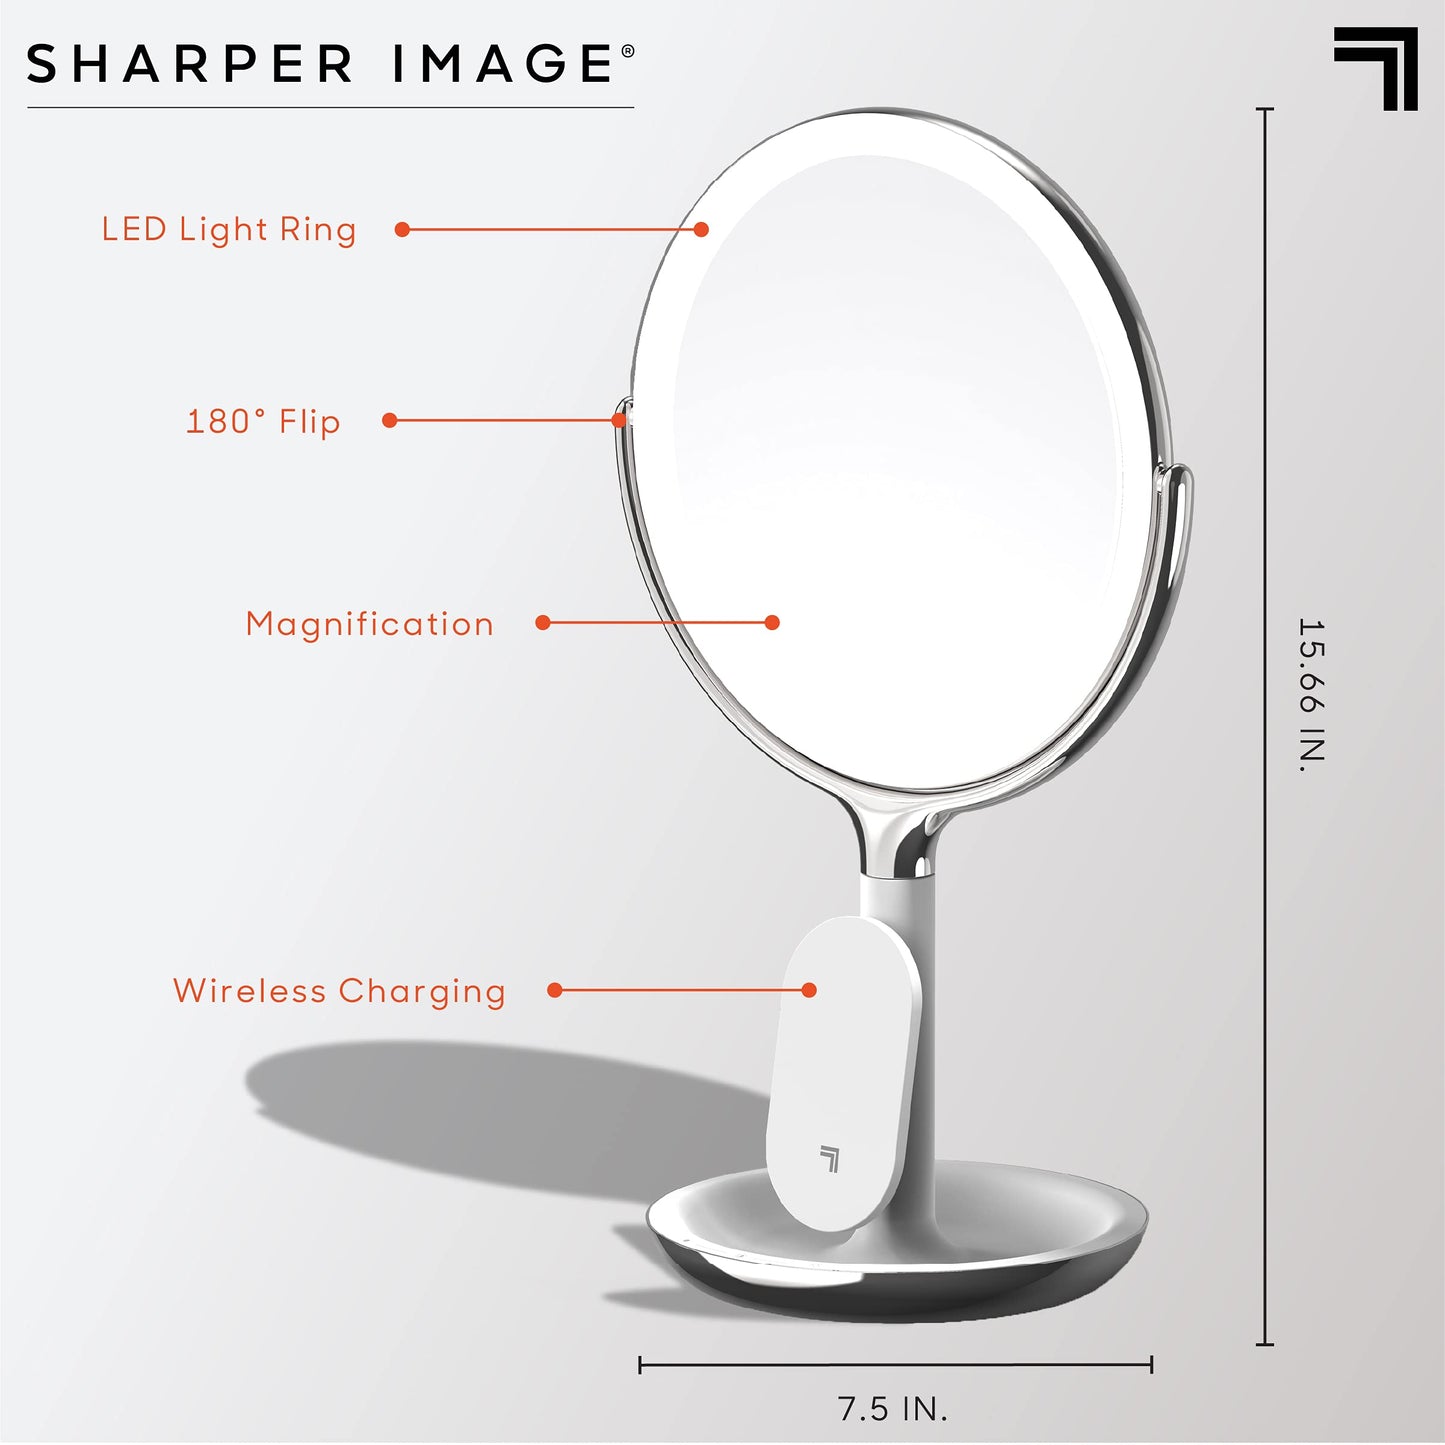 Sharper Image® SpaStudio™ 8” Vanity Mirror - Wireless Qi Charging Pad, Dimmable LED Halo Light Ring, 10X & 5X Magnification, Cosmetic Makeup Skincare Essential, Aesthetic Room Desk Decor Storage